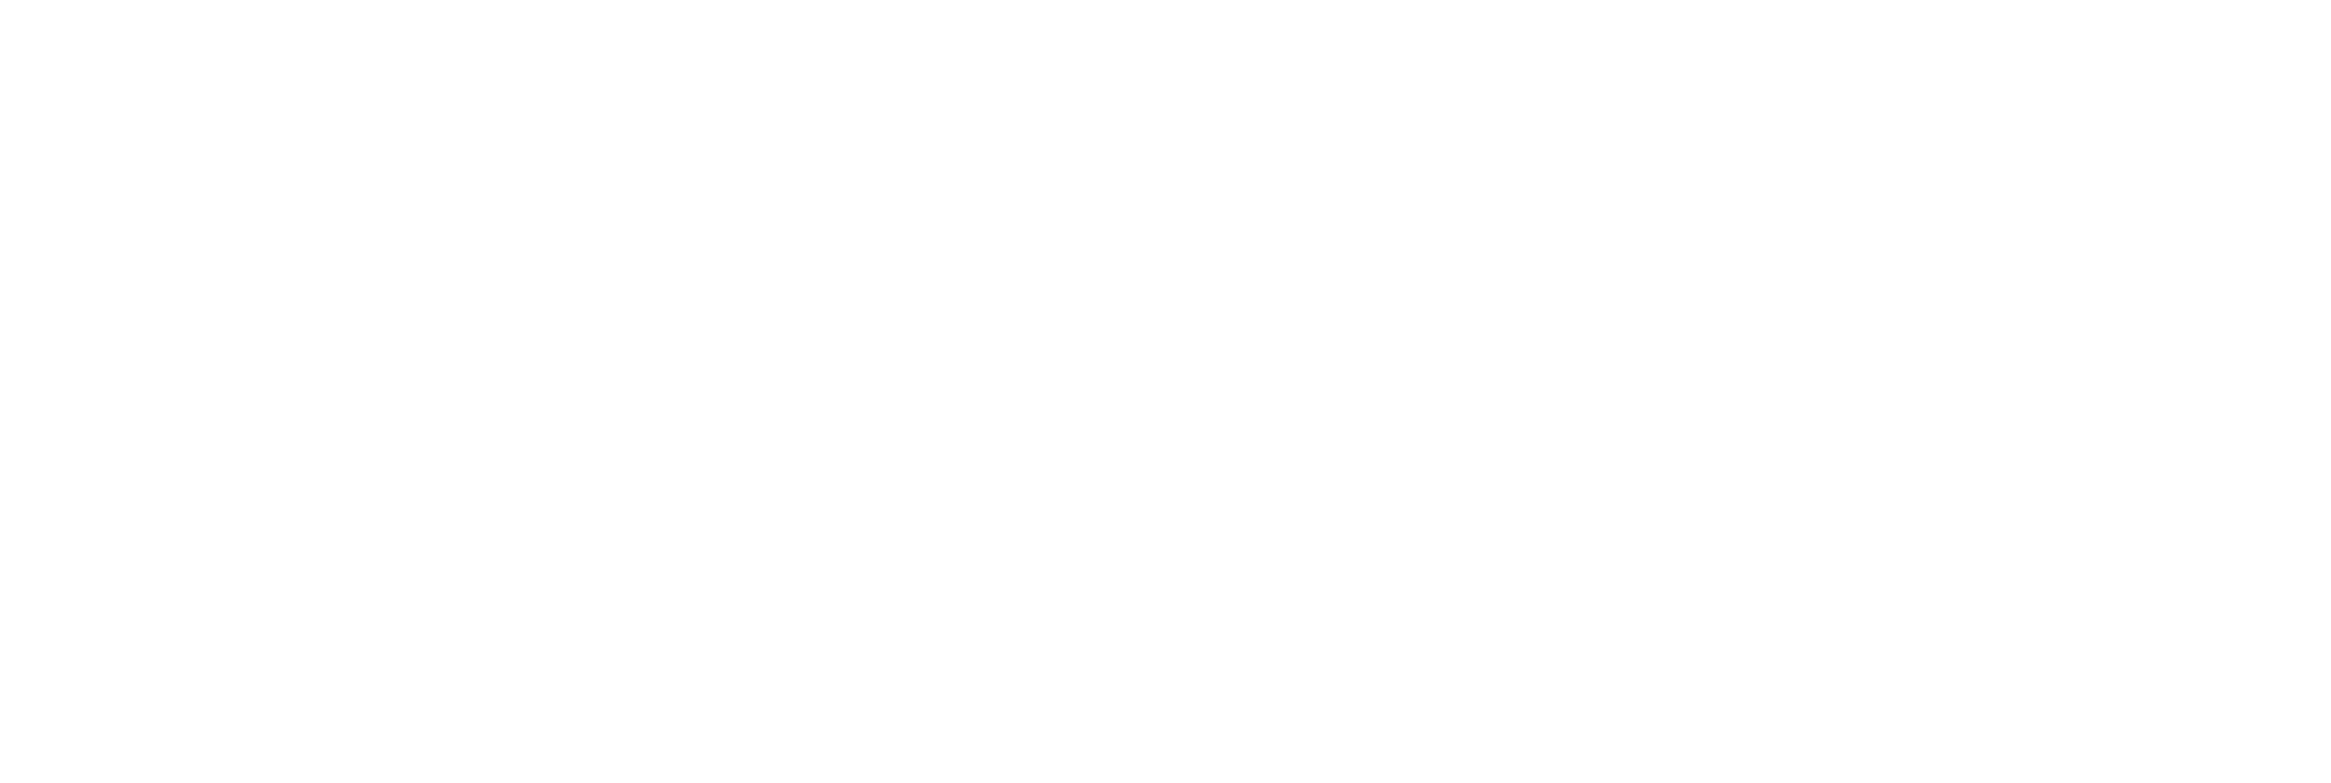 Download Trane Logo Black And White Samsung Logo White Png Png Image With No Background Pngkey Com